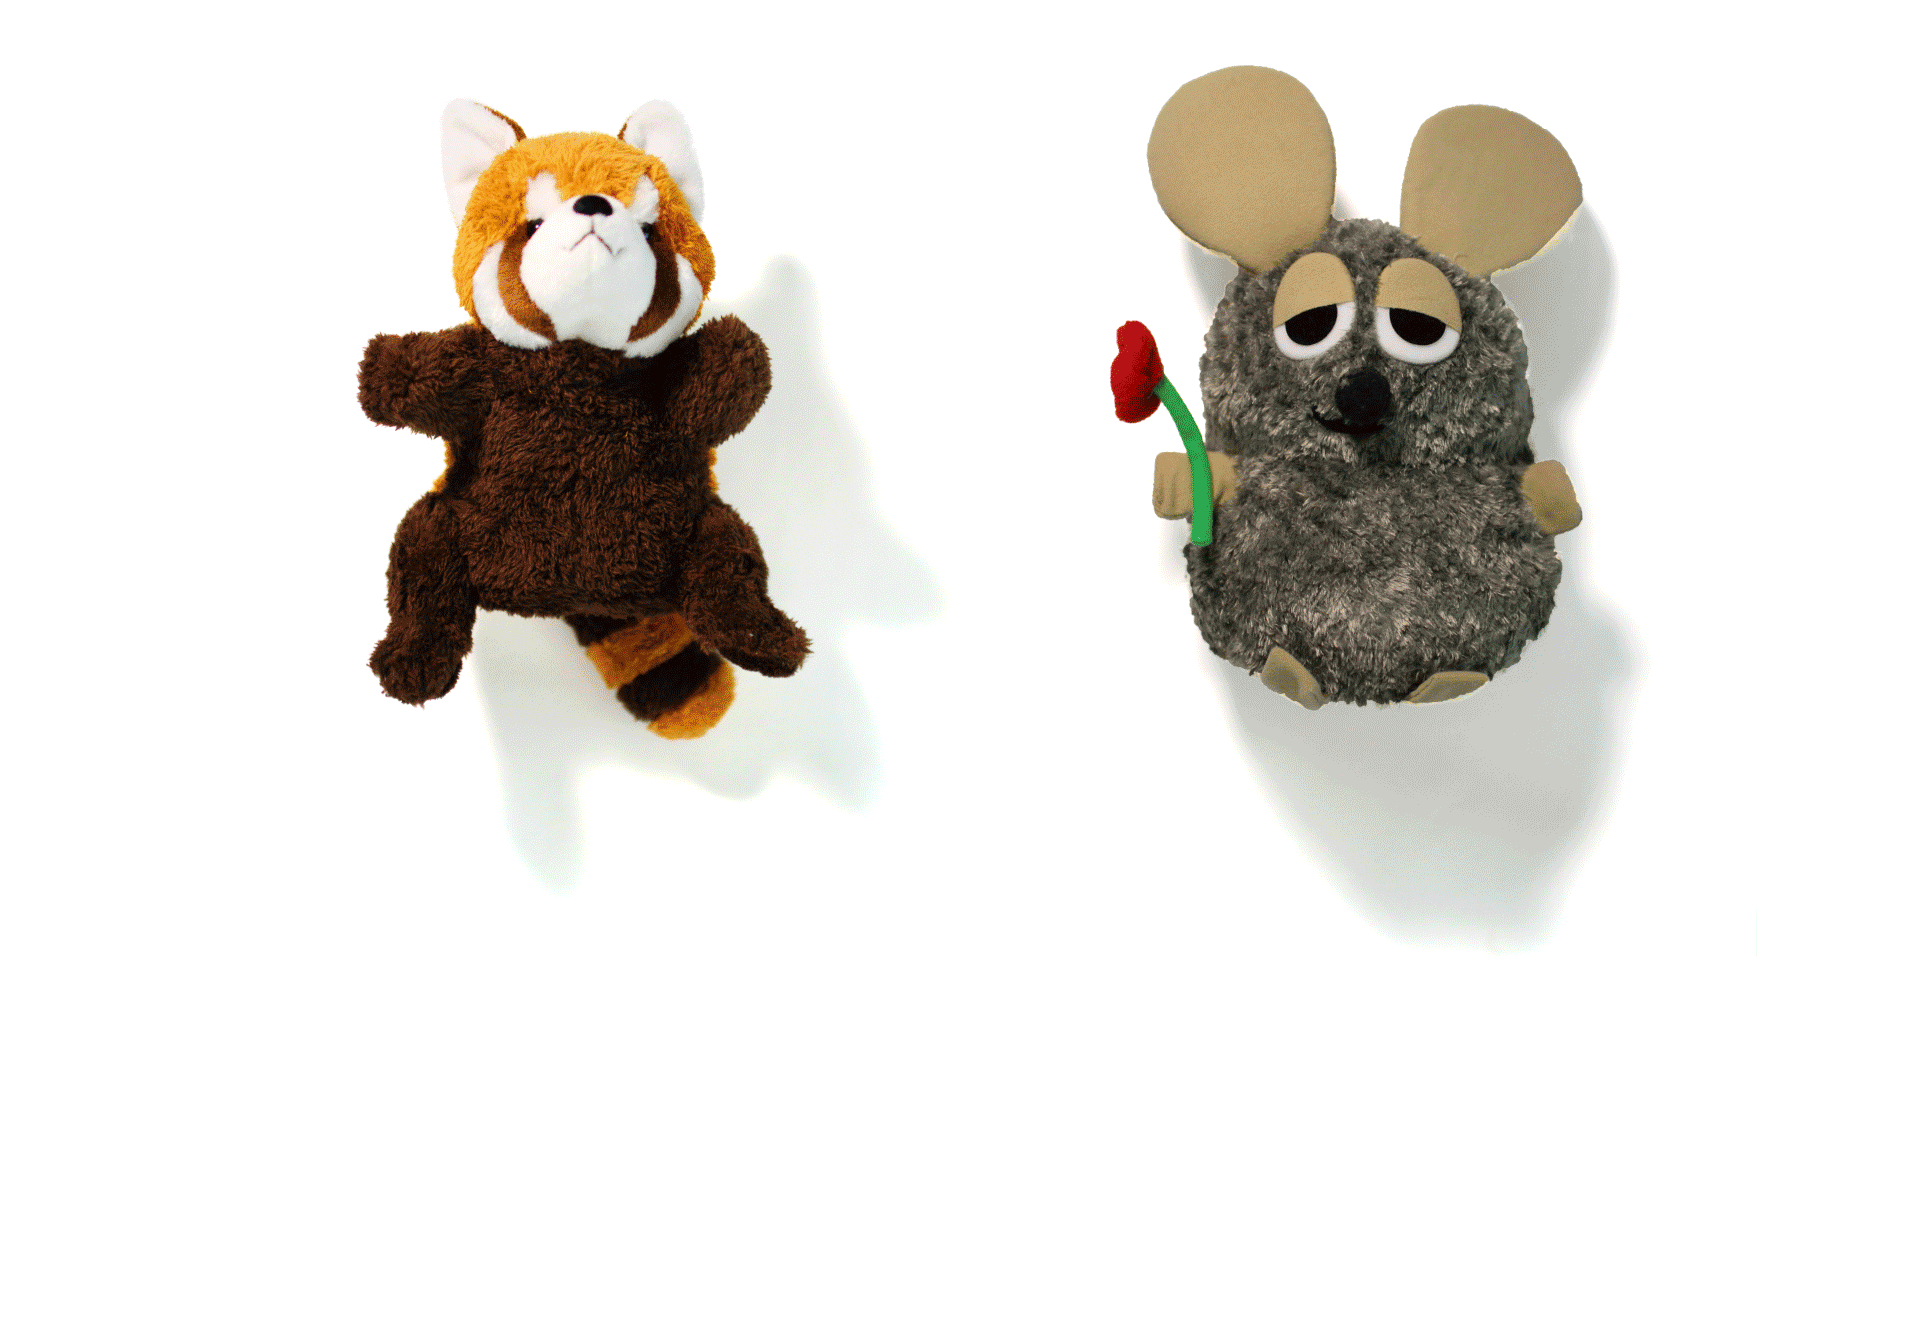 Give Hand Puppets Some Love And Guts – ‘Puppet Guts’ Are Plush Organs That Can Be Used As Stuffing For Puppets